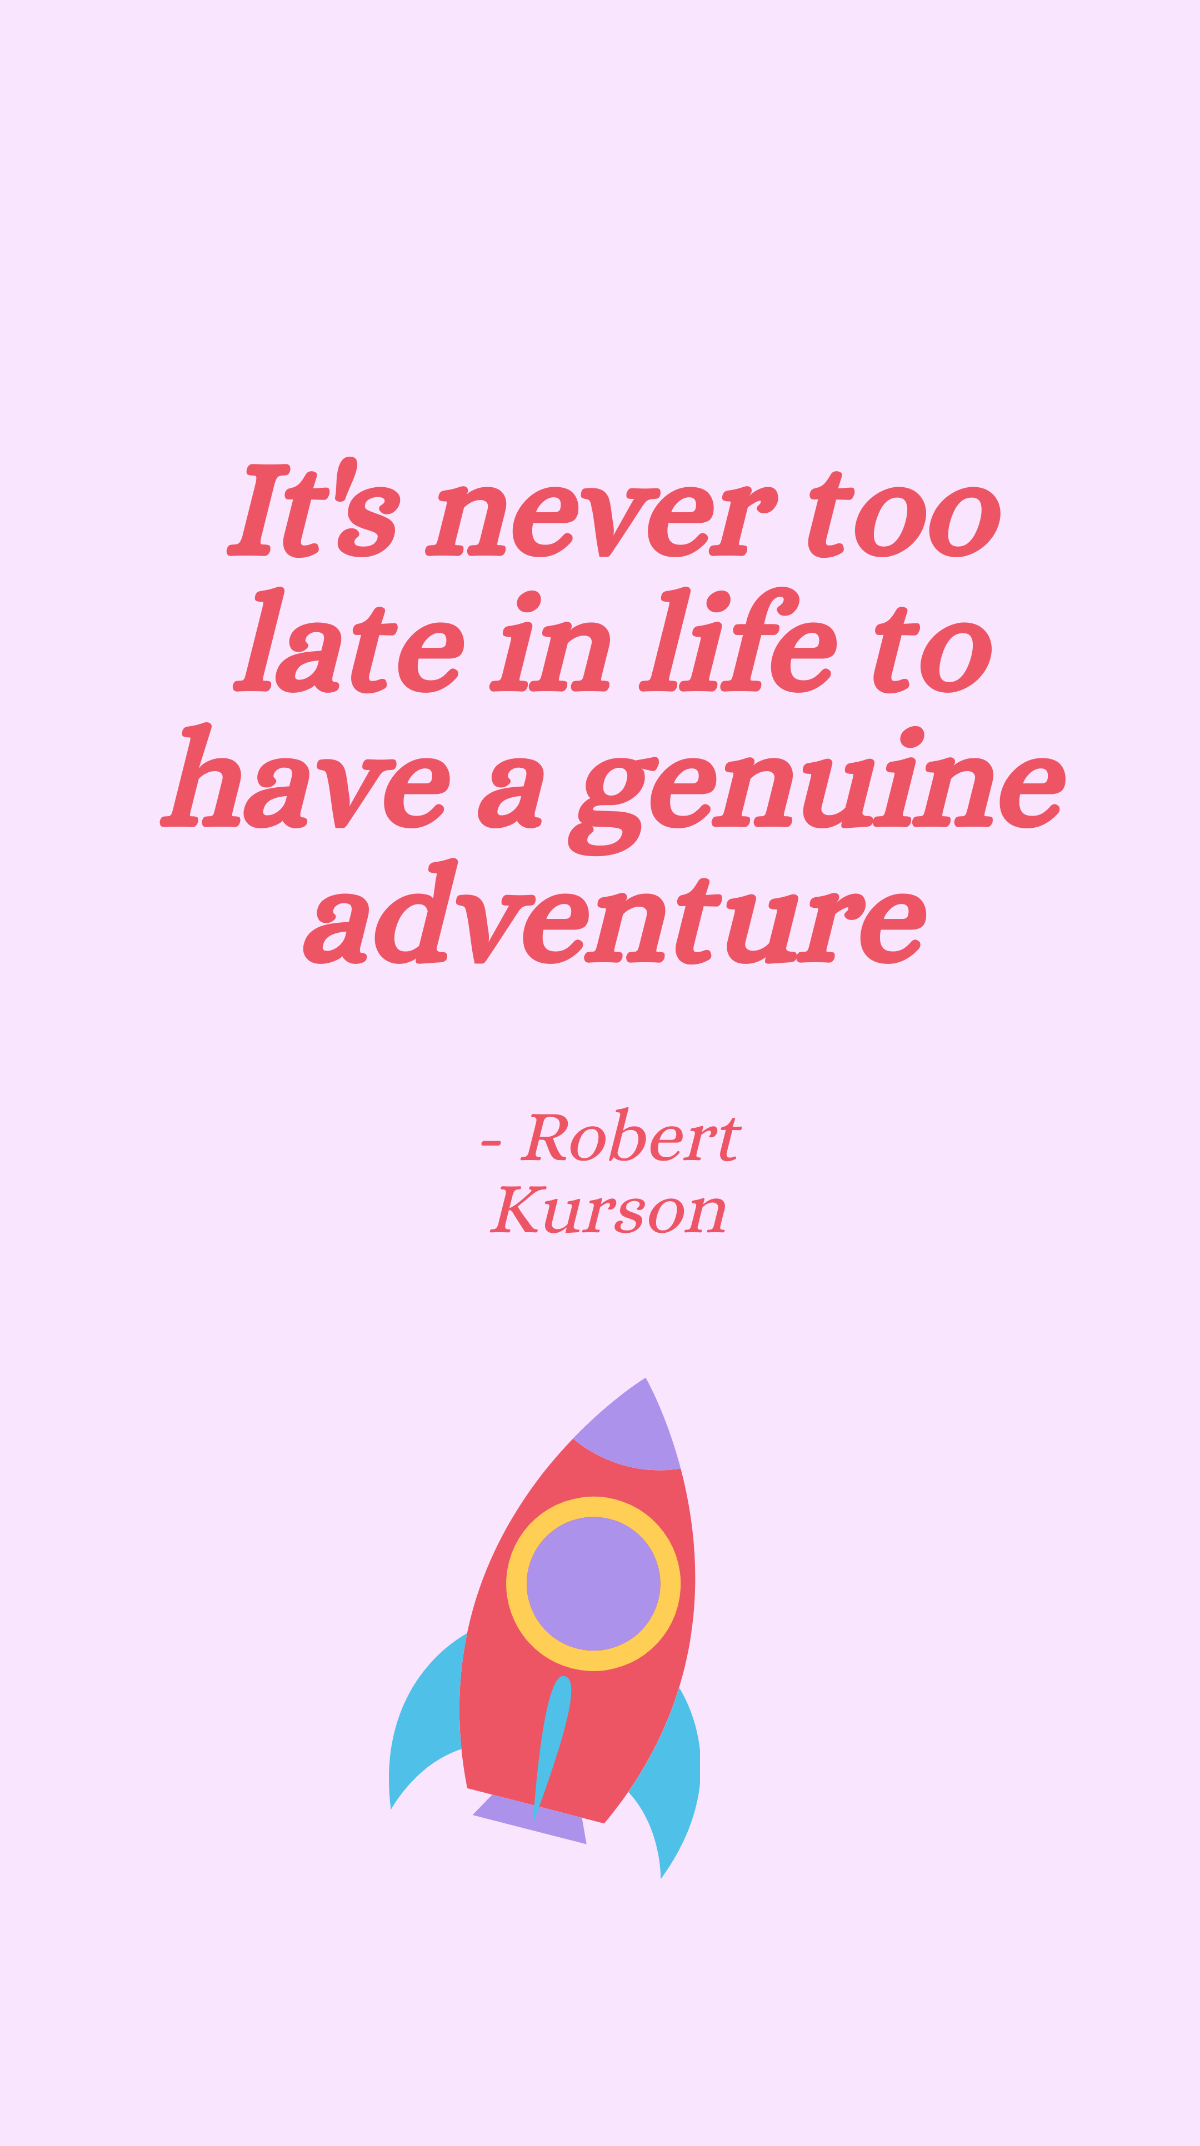 Free Robert Kurson - It's never too late in life to have a genuine adventure Template